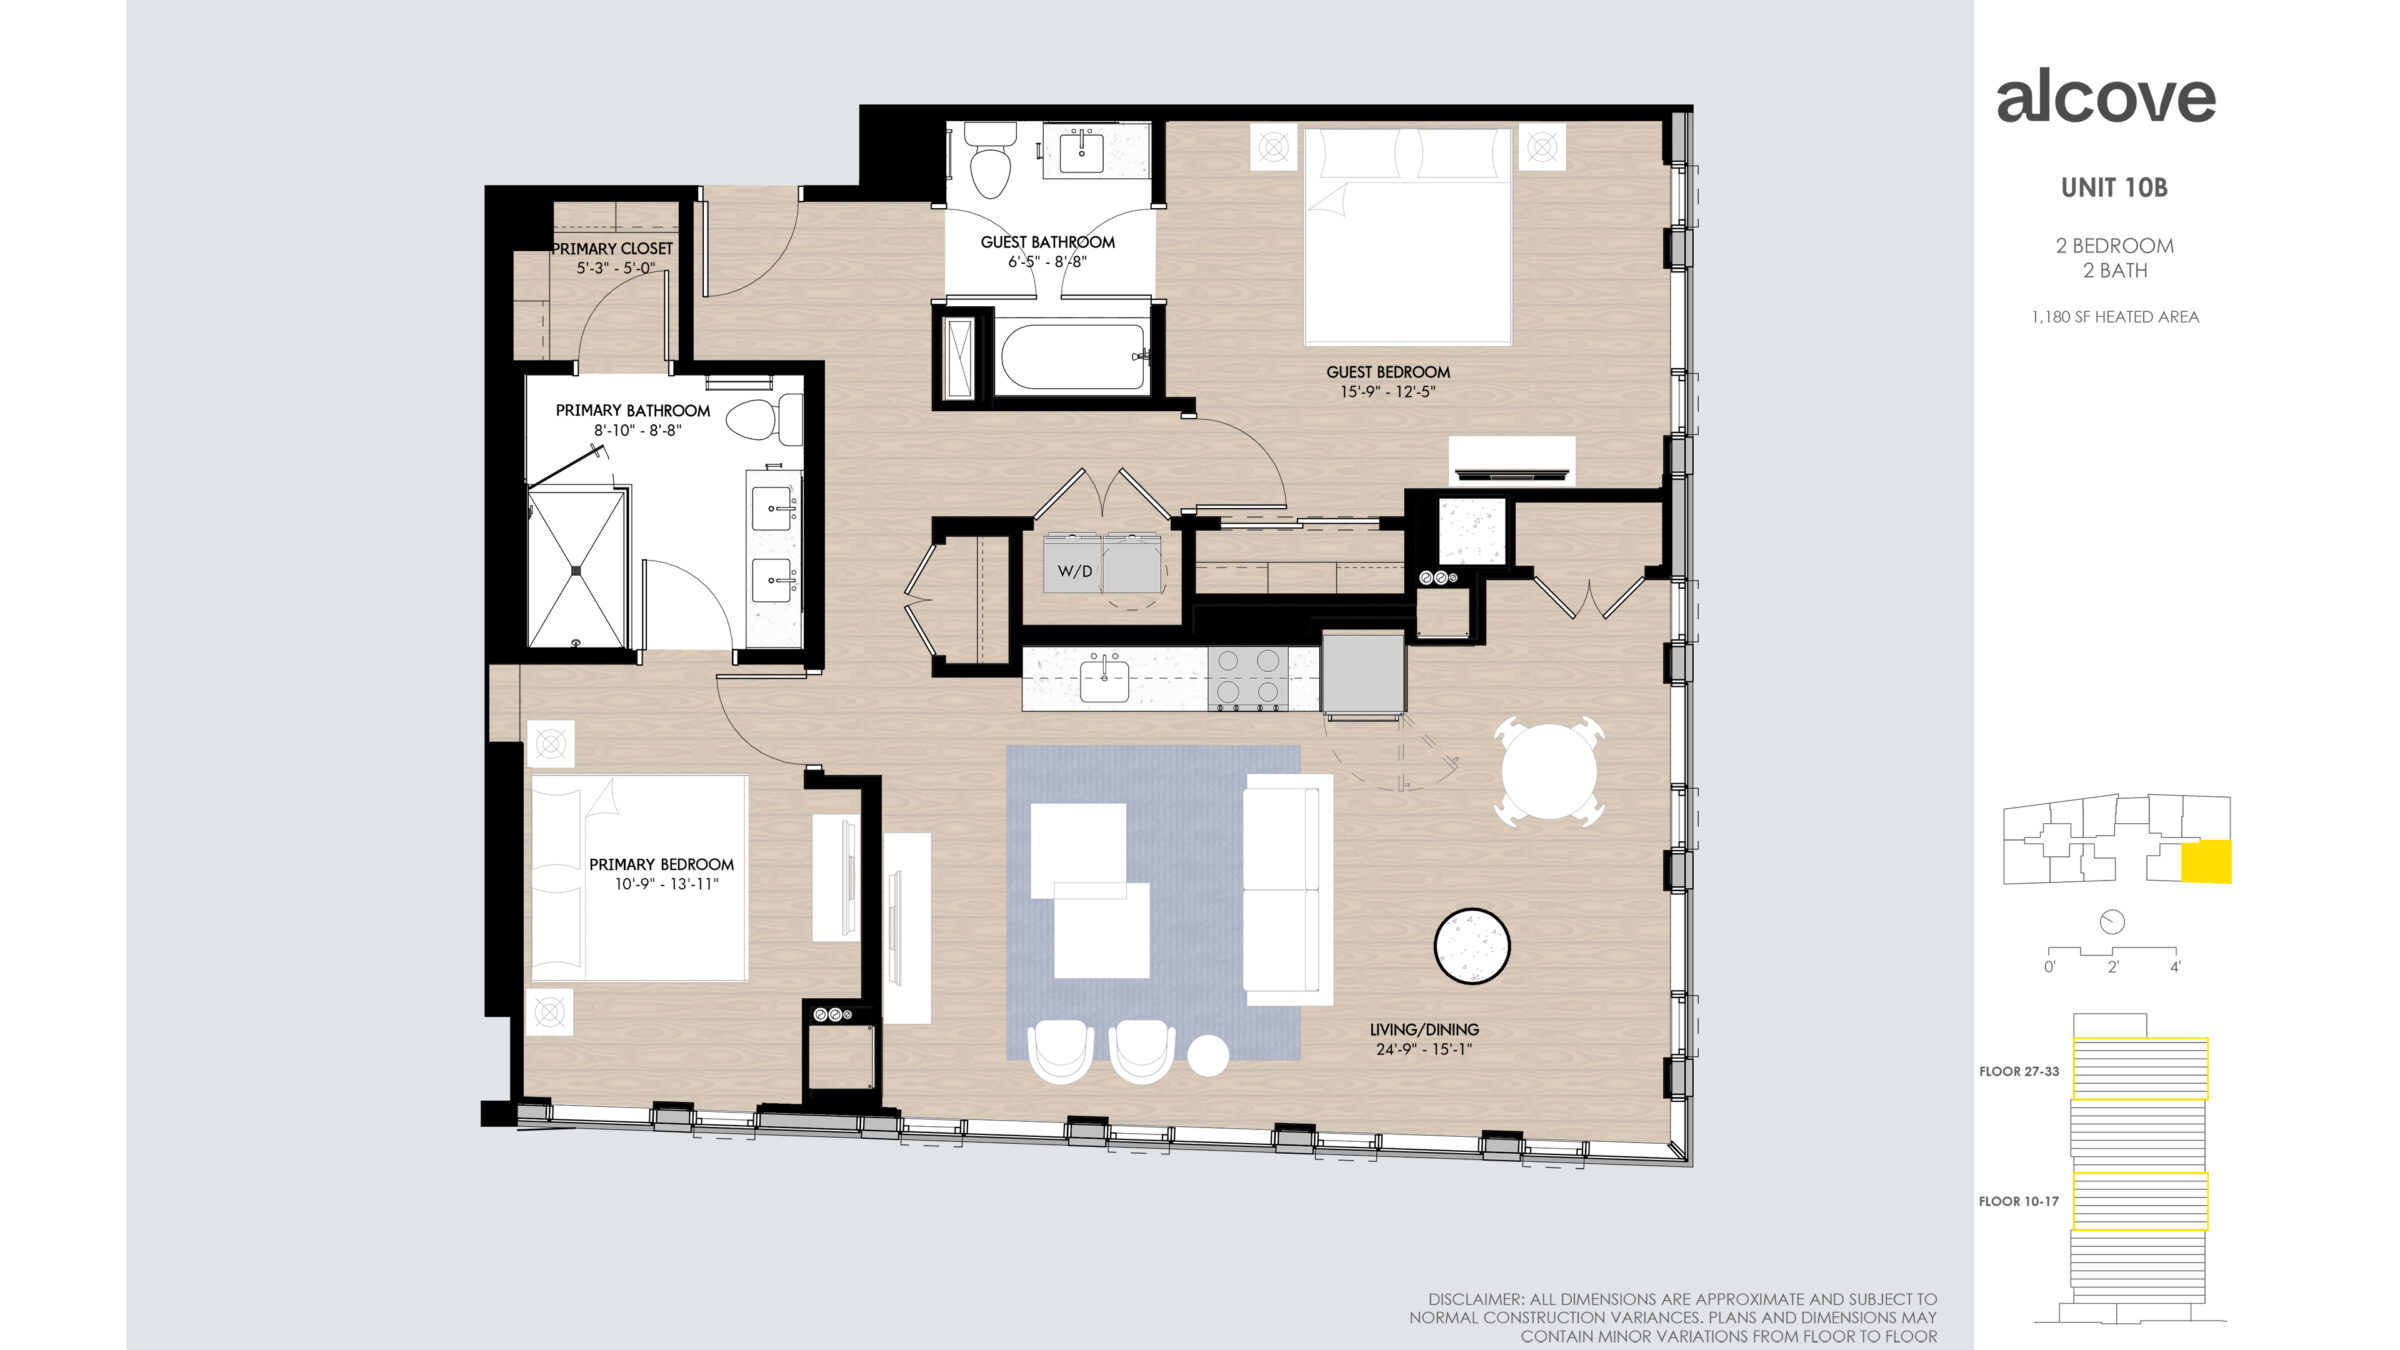 UNIT 10B 2 BEDROOM 2 BATH 1180 SF HEATED AREA Floor 27-33 Floor 10-17 Disclaimer: all dimensions are approximate and subject to normal construction variances. Plans and dimensions may contain minor variations from floor to floor.